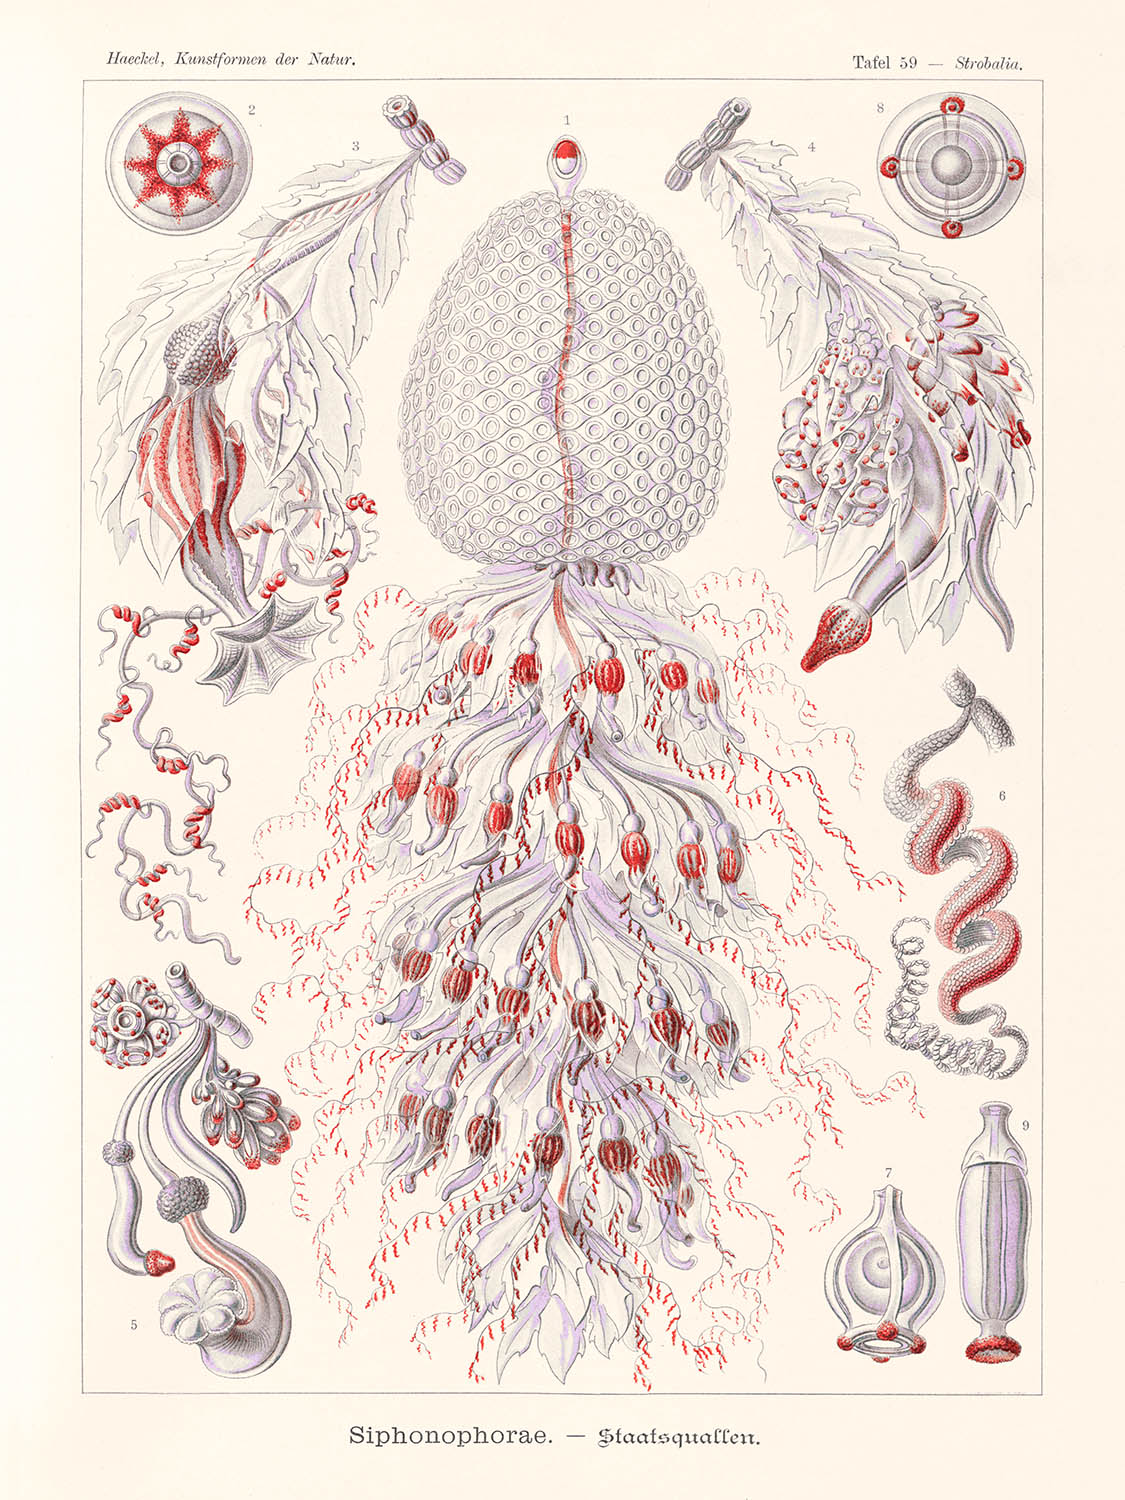 Tube Polyp Zooid (Siphonophorae Staatsquallen) by Ernst Haeckel, 1904